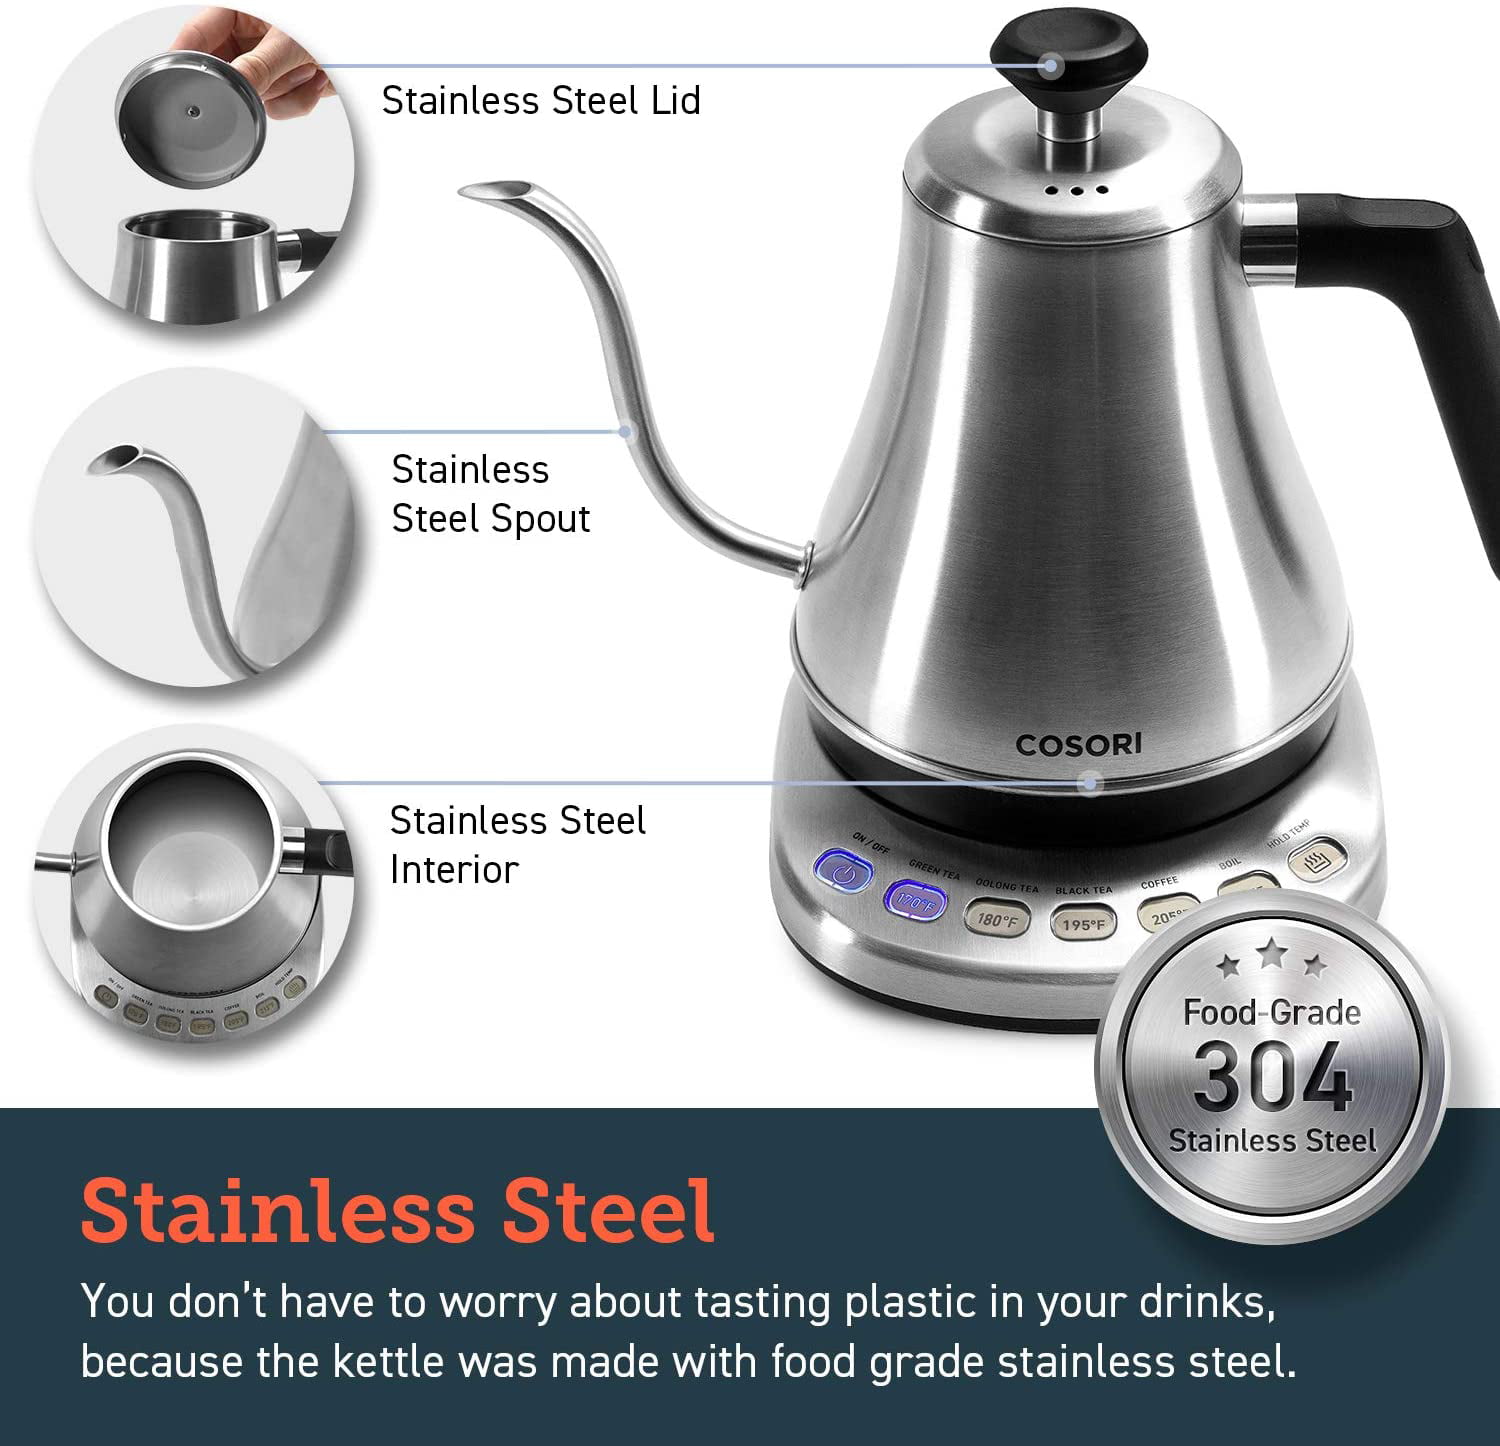 Electric Goose Neck Kettle, Coffee Pot, Hot Water Boiler And Teapot With  1200w Strix Temperature Control, 800ml Capacity, 304 Stainless Steel  Material, Matte Texture, Suitable For Home Gathering, Office And Dormitory  Lps-1995